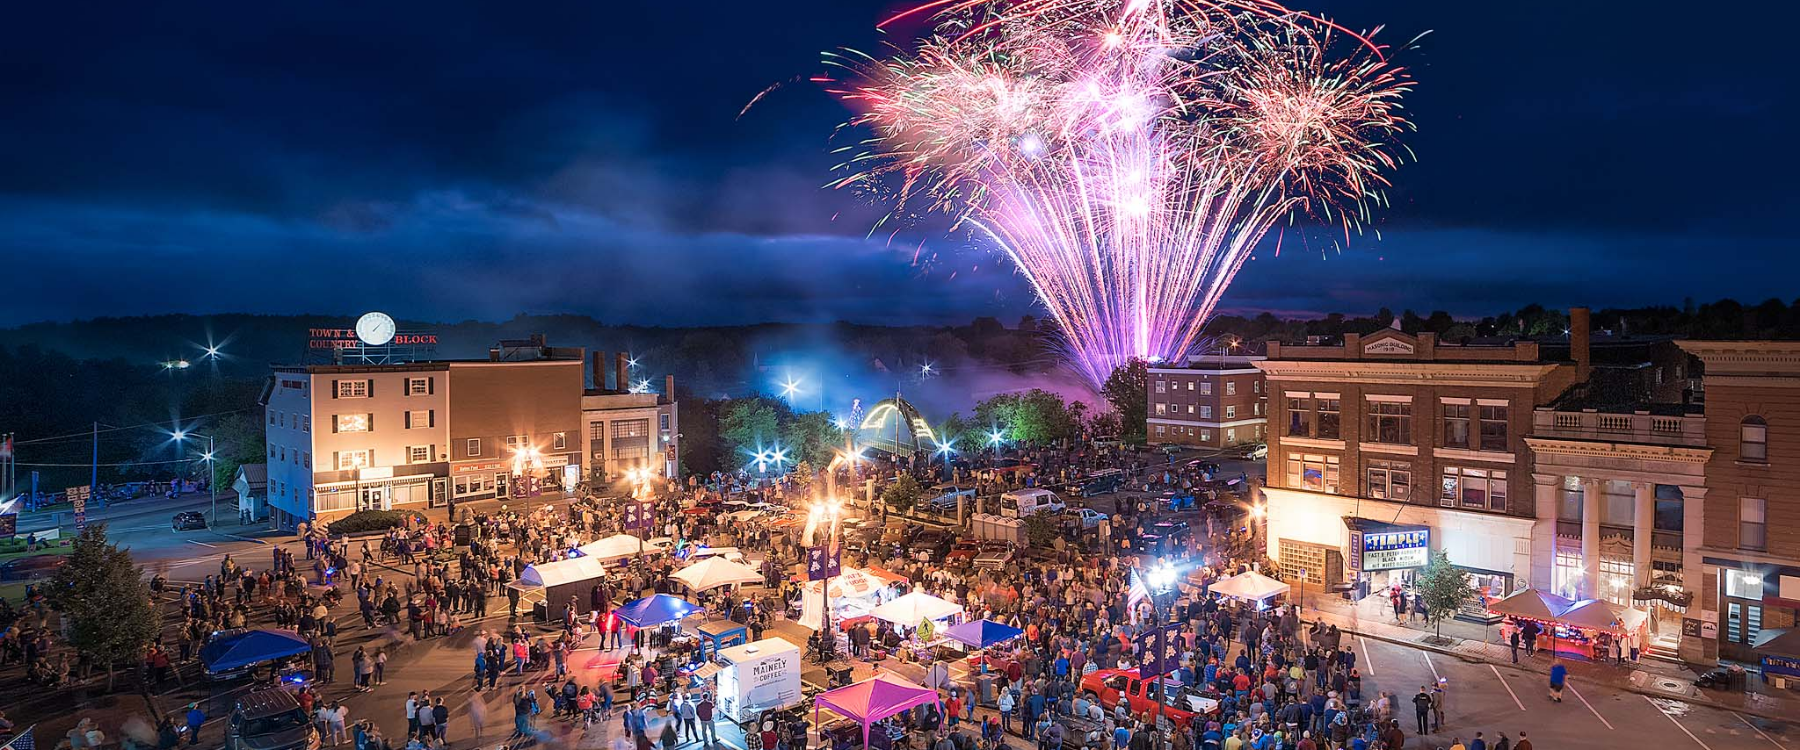 Nowhere does the fourth of July better than Houlton, Maine